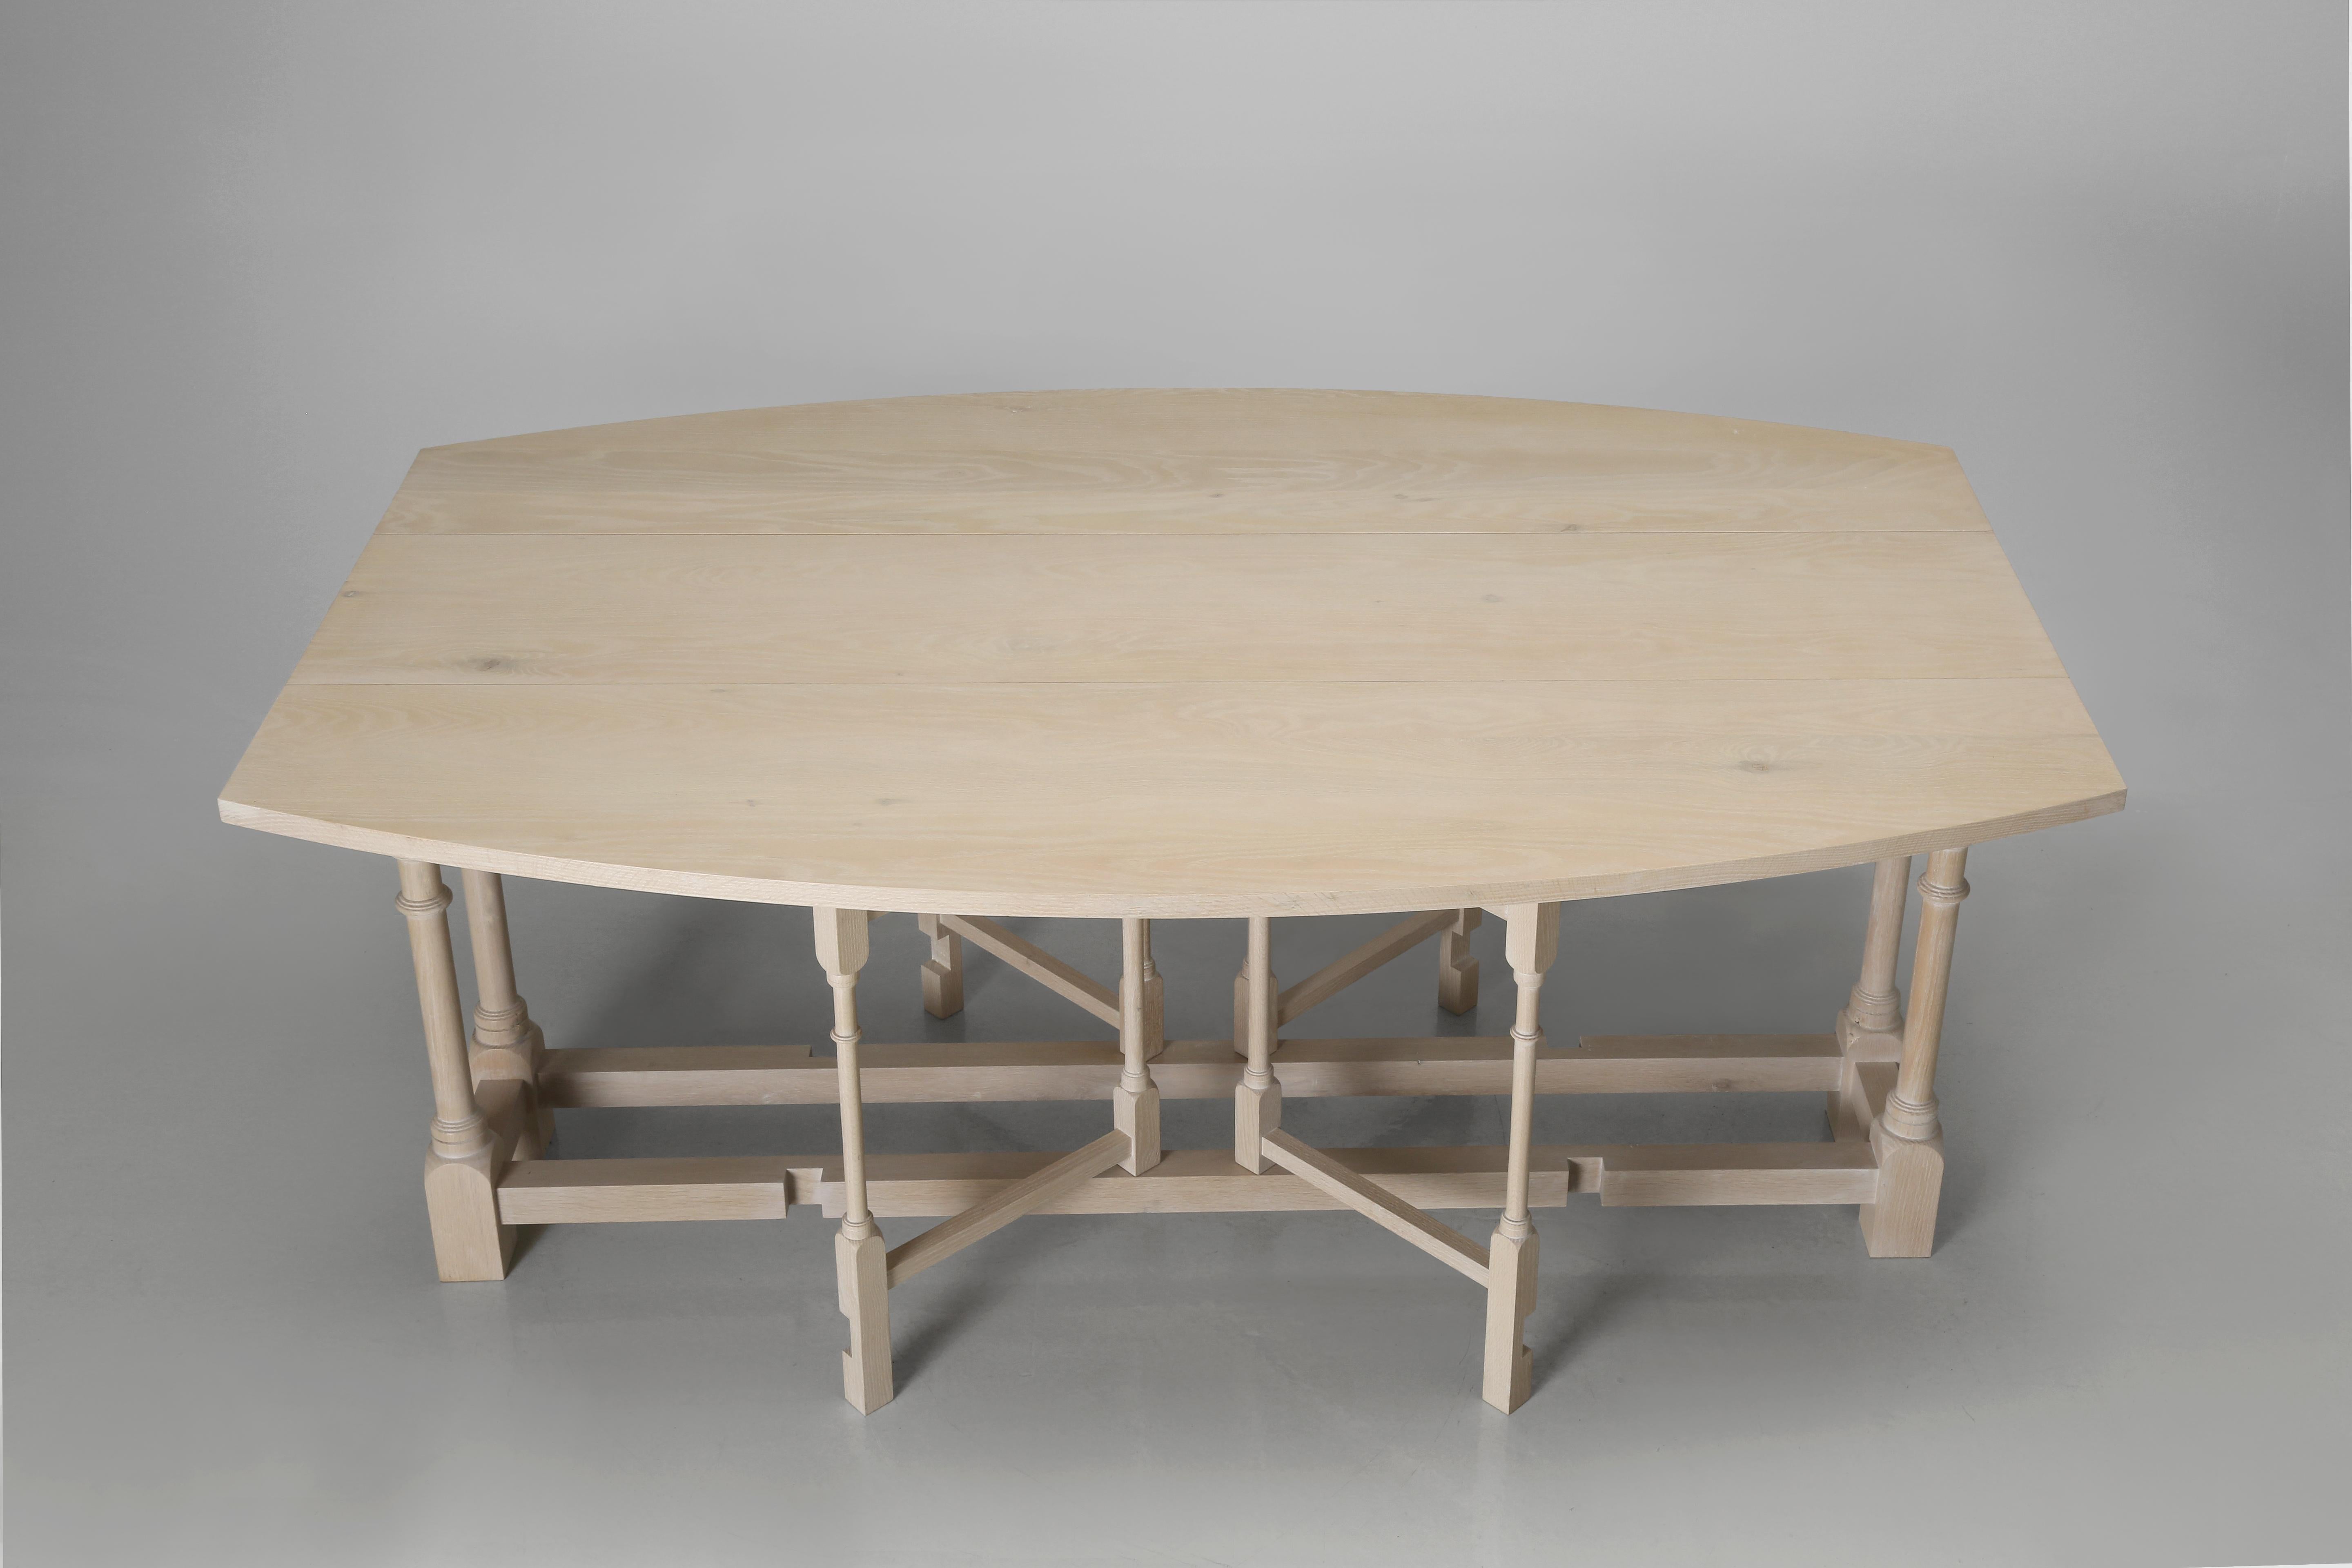 Country Drop-Leaf Dining Table Hand-Made in Chicago Available in any Dimension or Finish For Sale